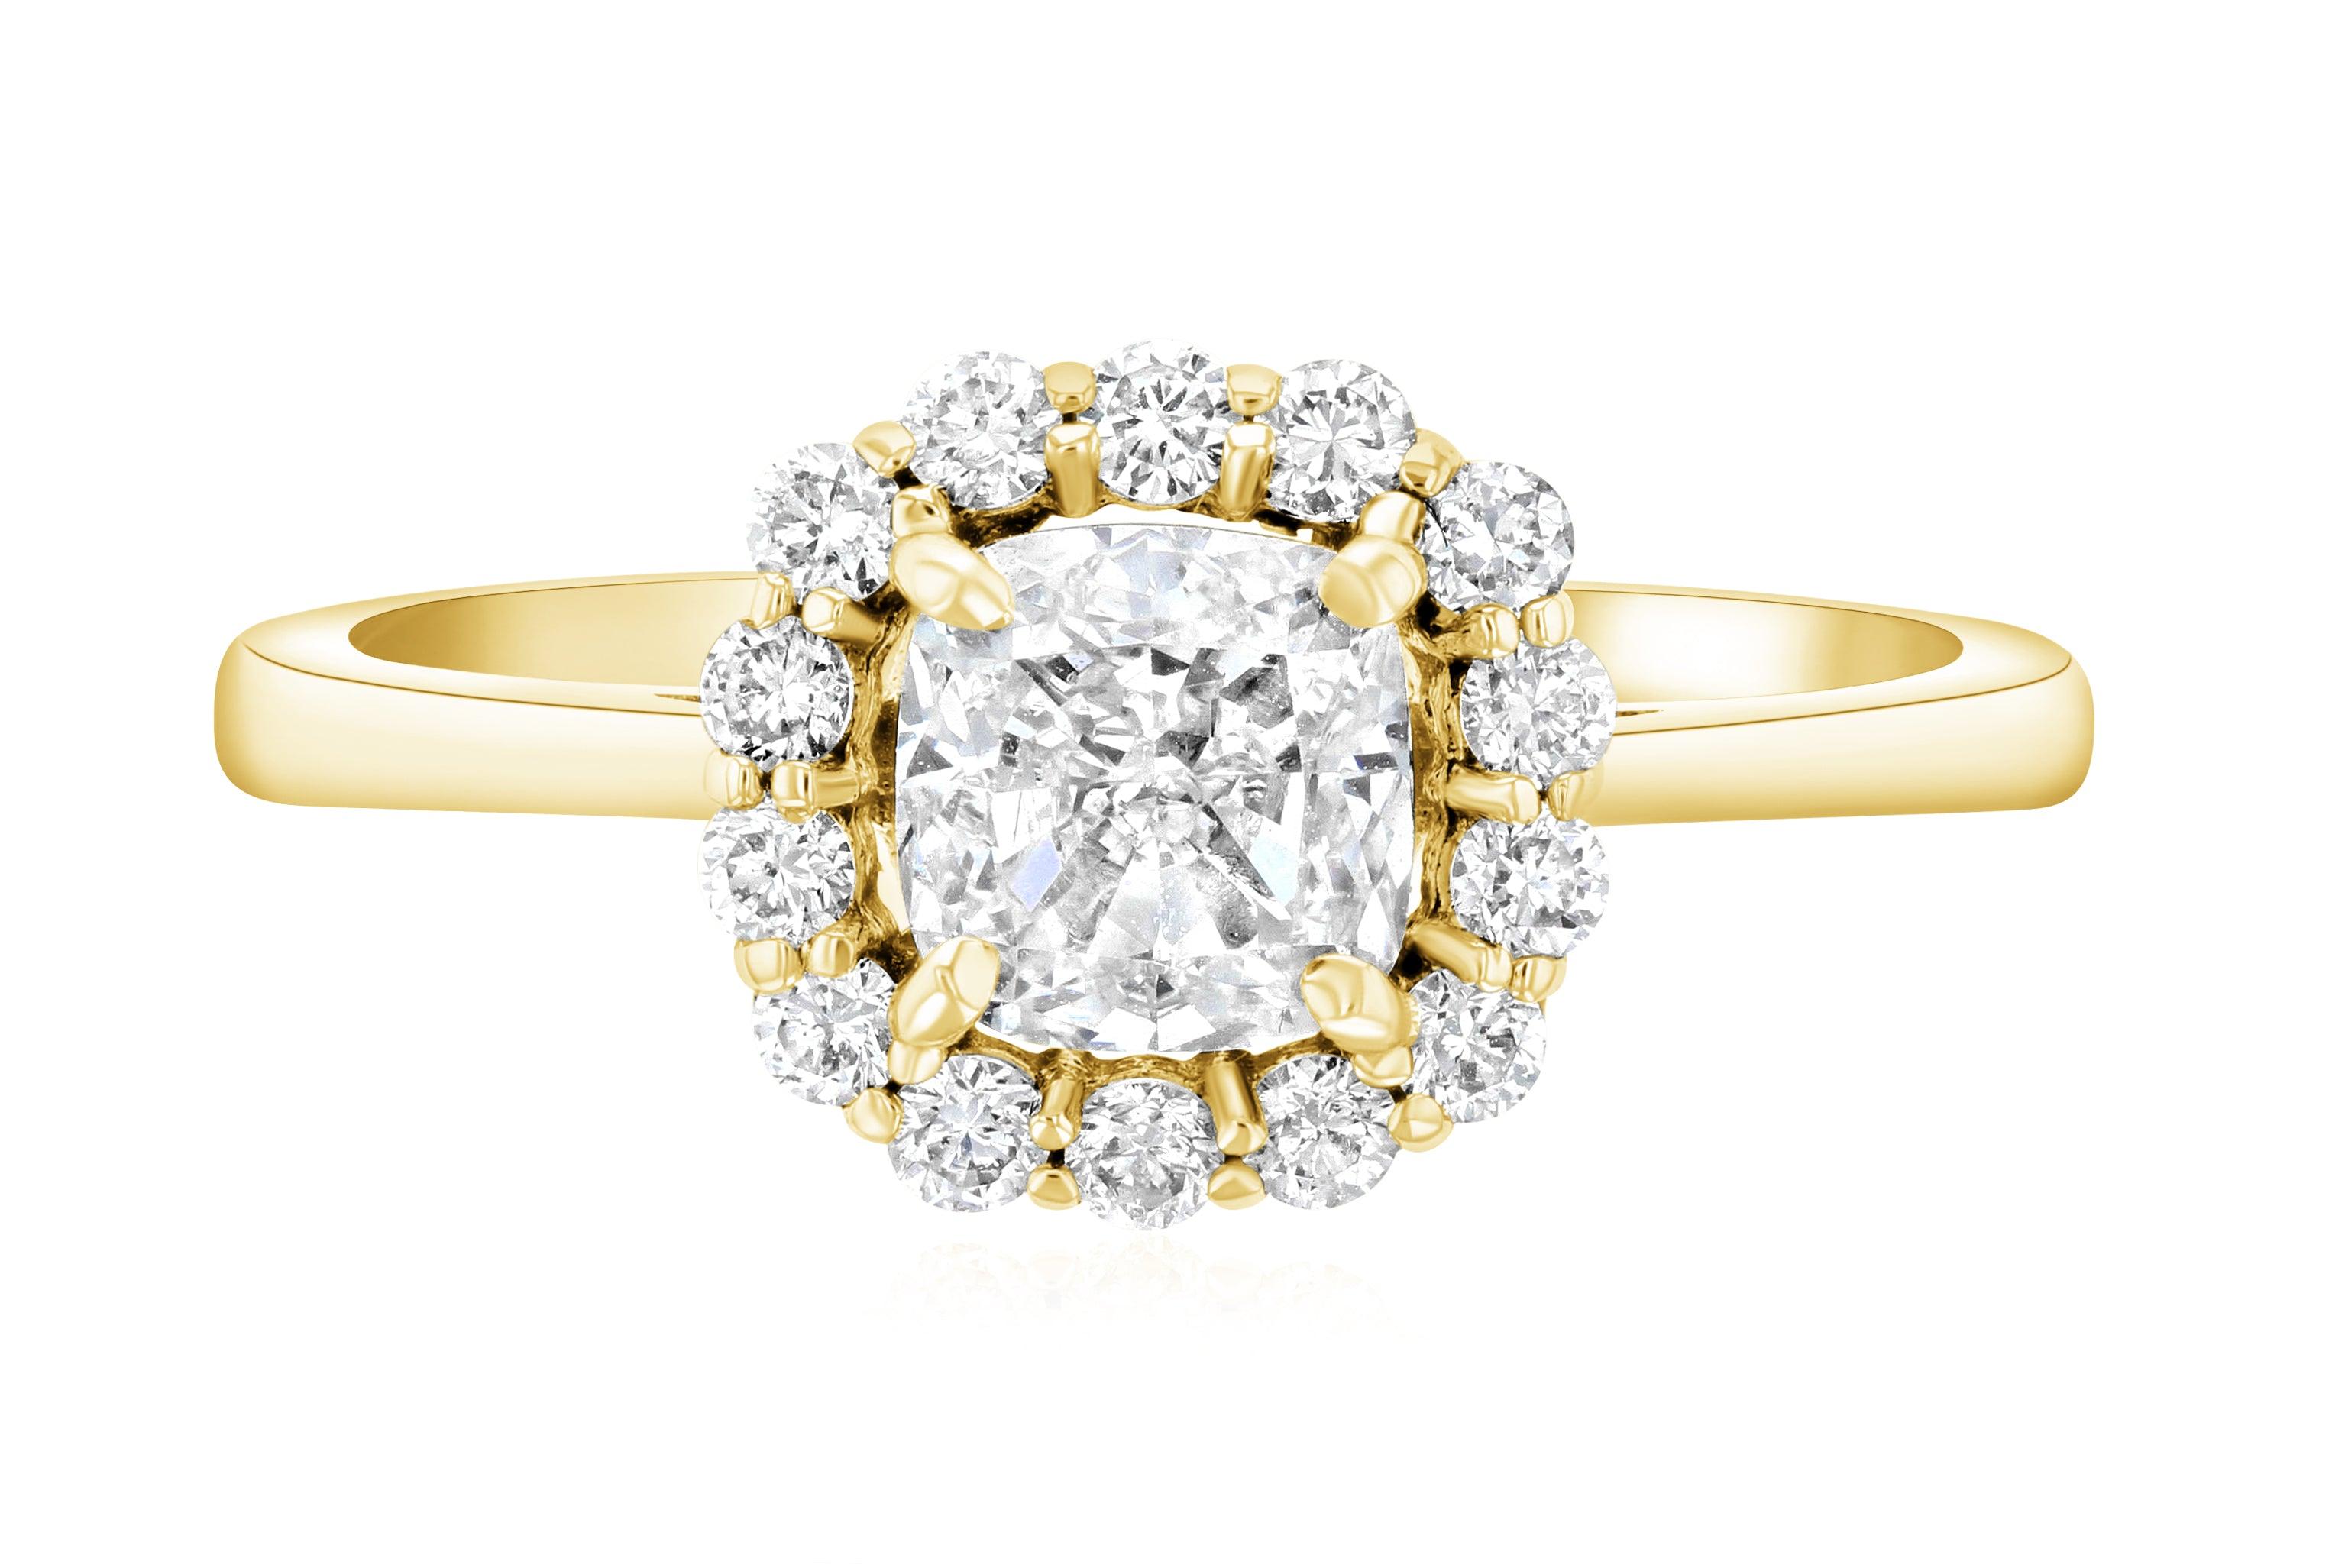 Halo Cushion Diamond Engagement Ring (1.28 ct. tw.) - The Brothers Jewelry Co.